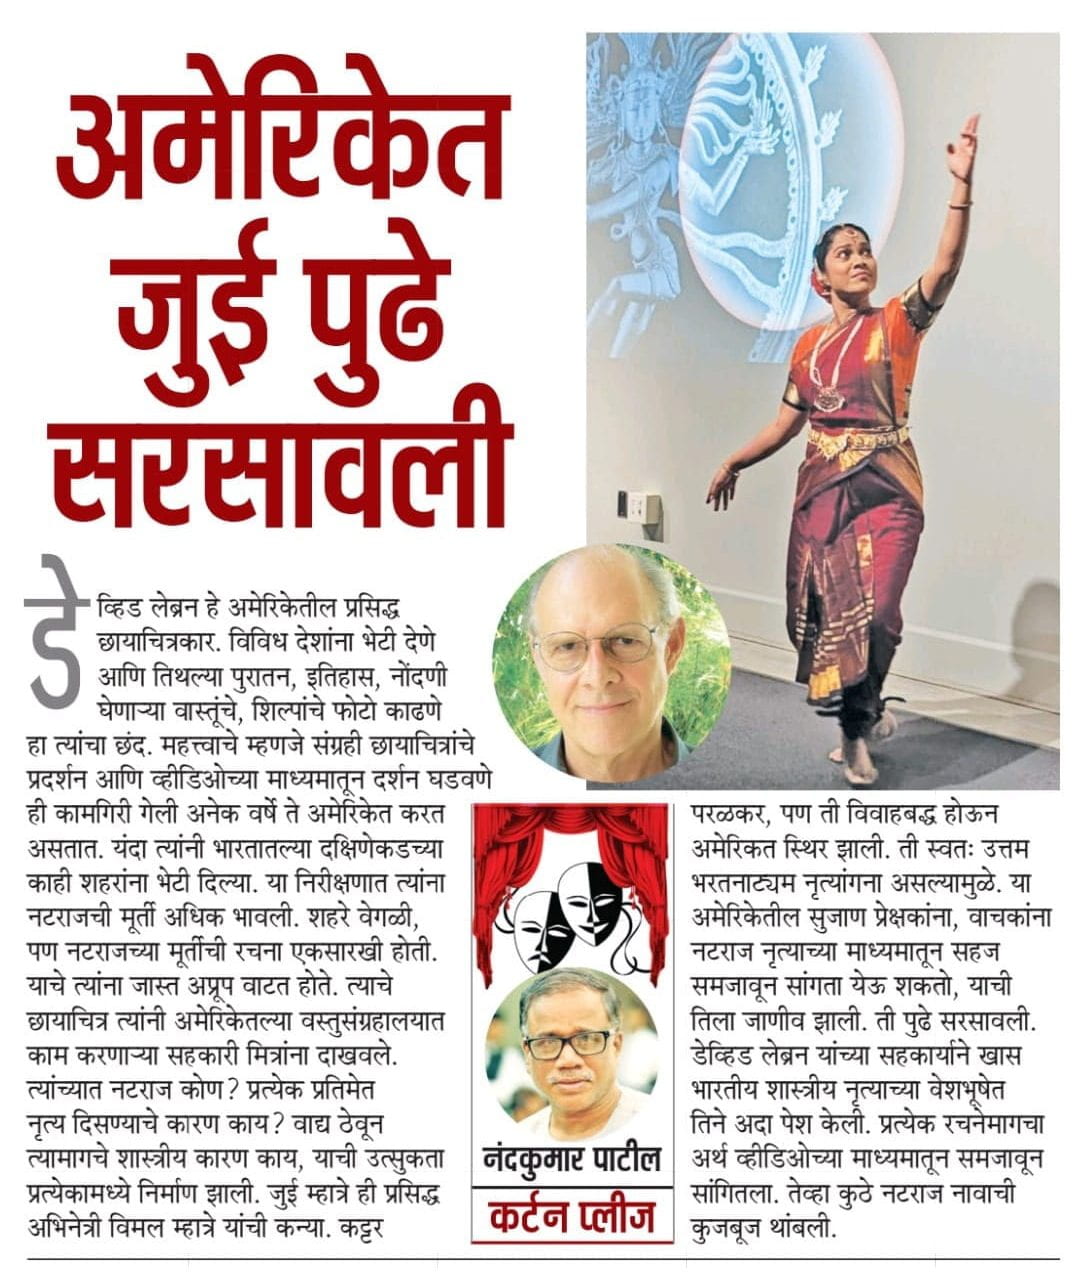 Article in the Marathi language newspaper "Prahaar" about the performance "Nataraja, The Lord of Dance" presented by Beach museum communications and marketing specialist Jui Mhatre. 